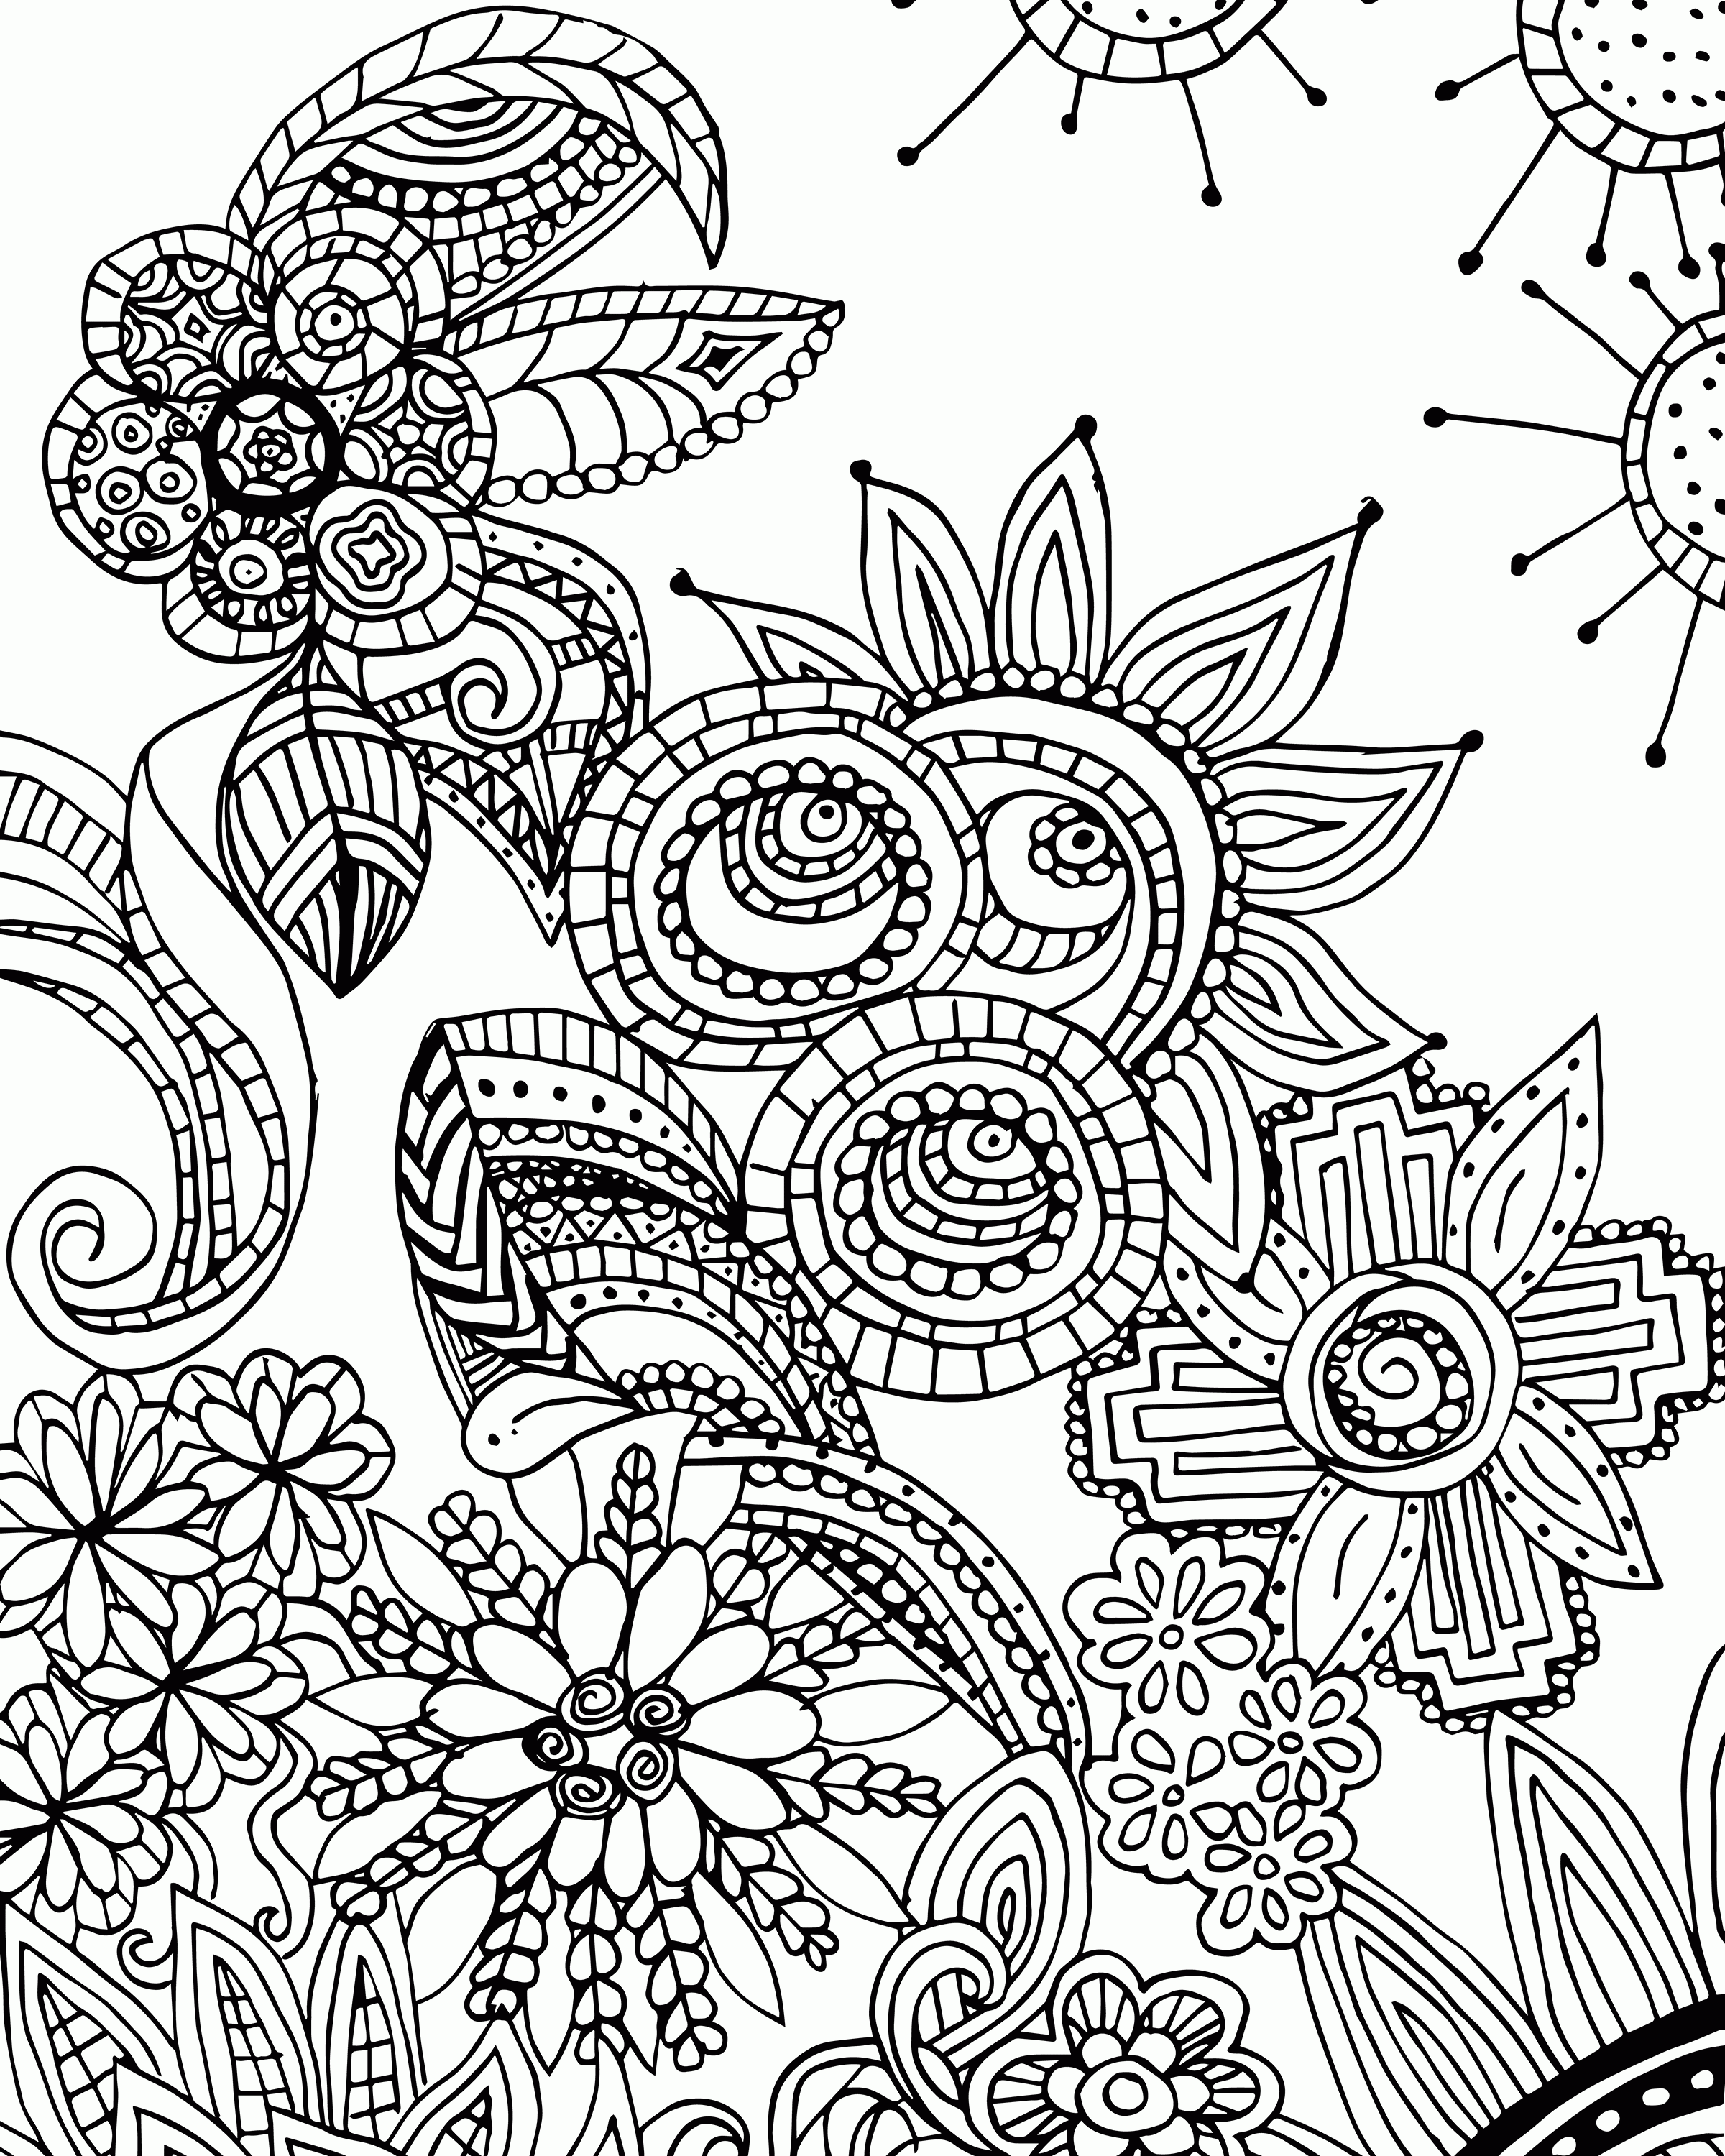 Doodle Coloring Pages For Kids - Coloring Home